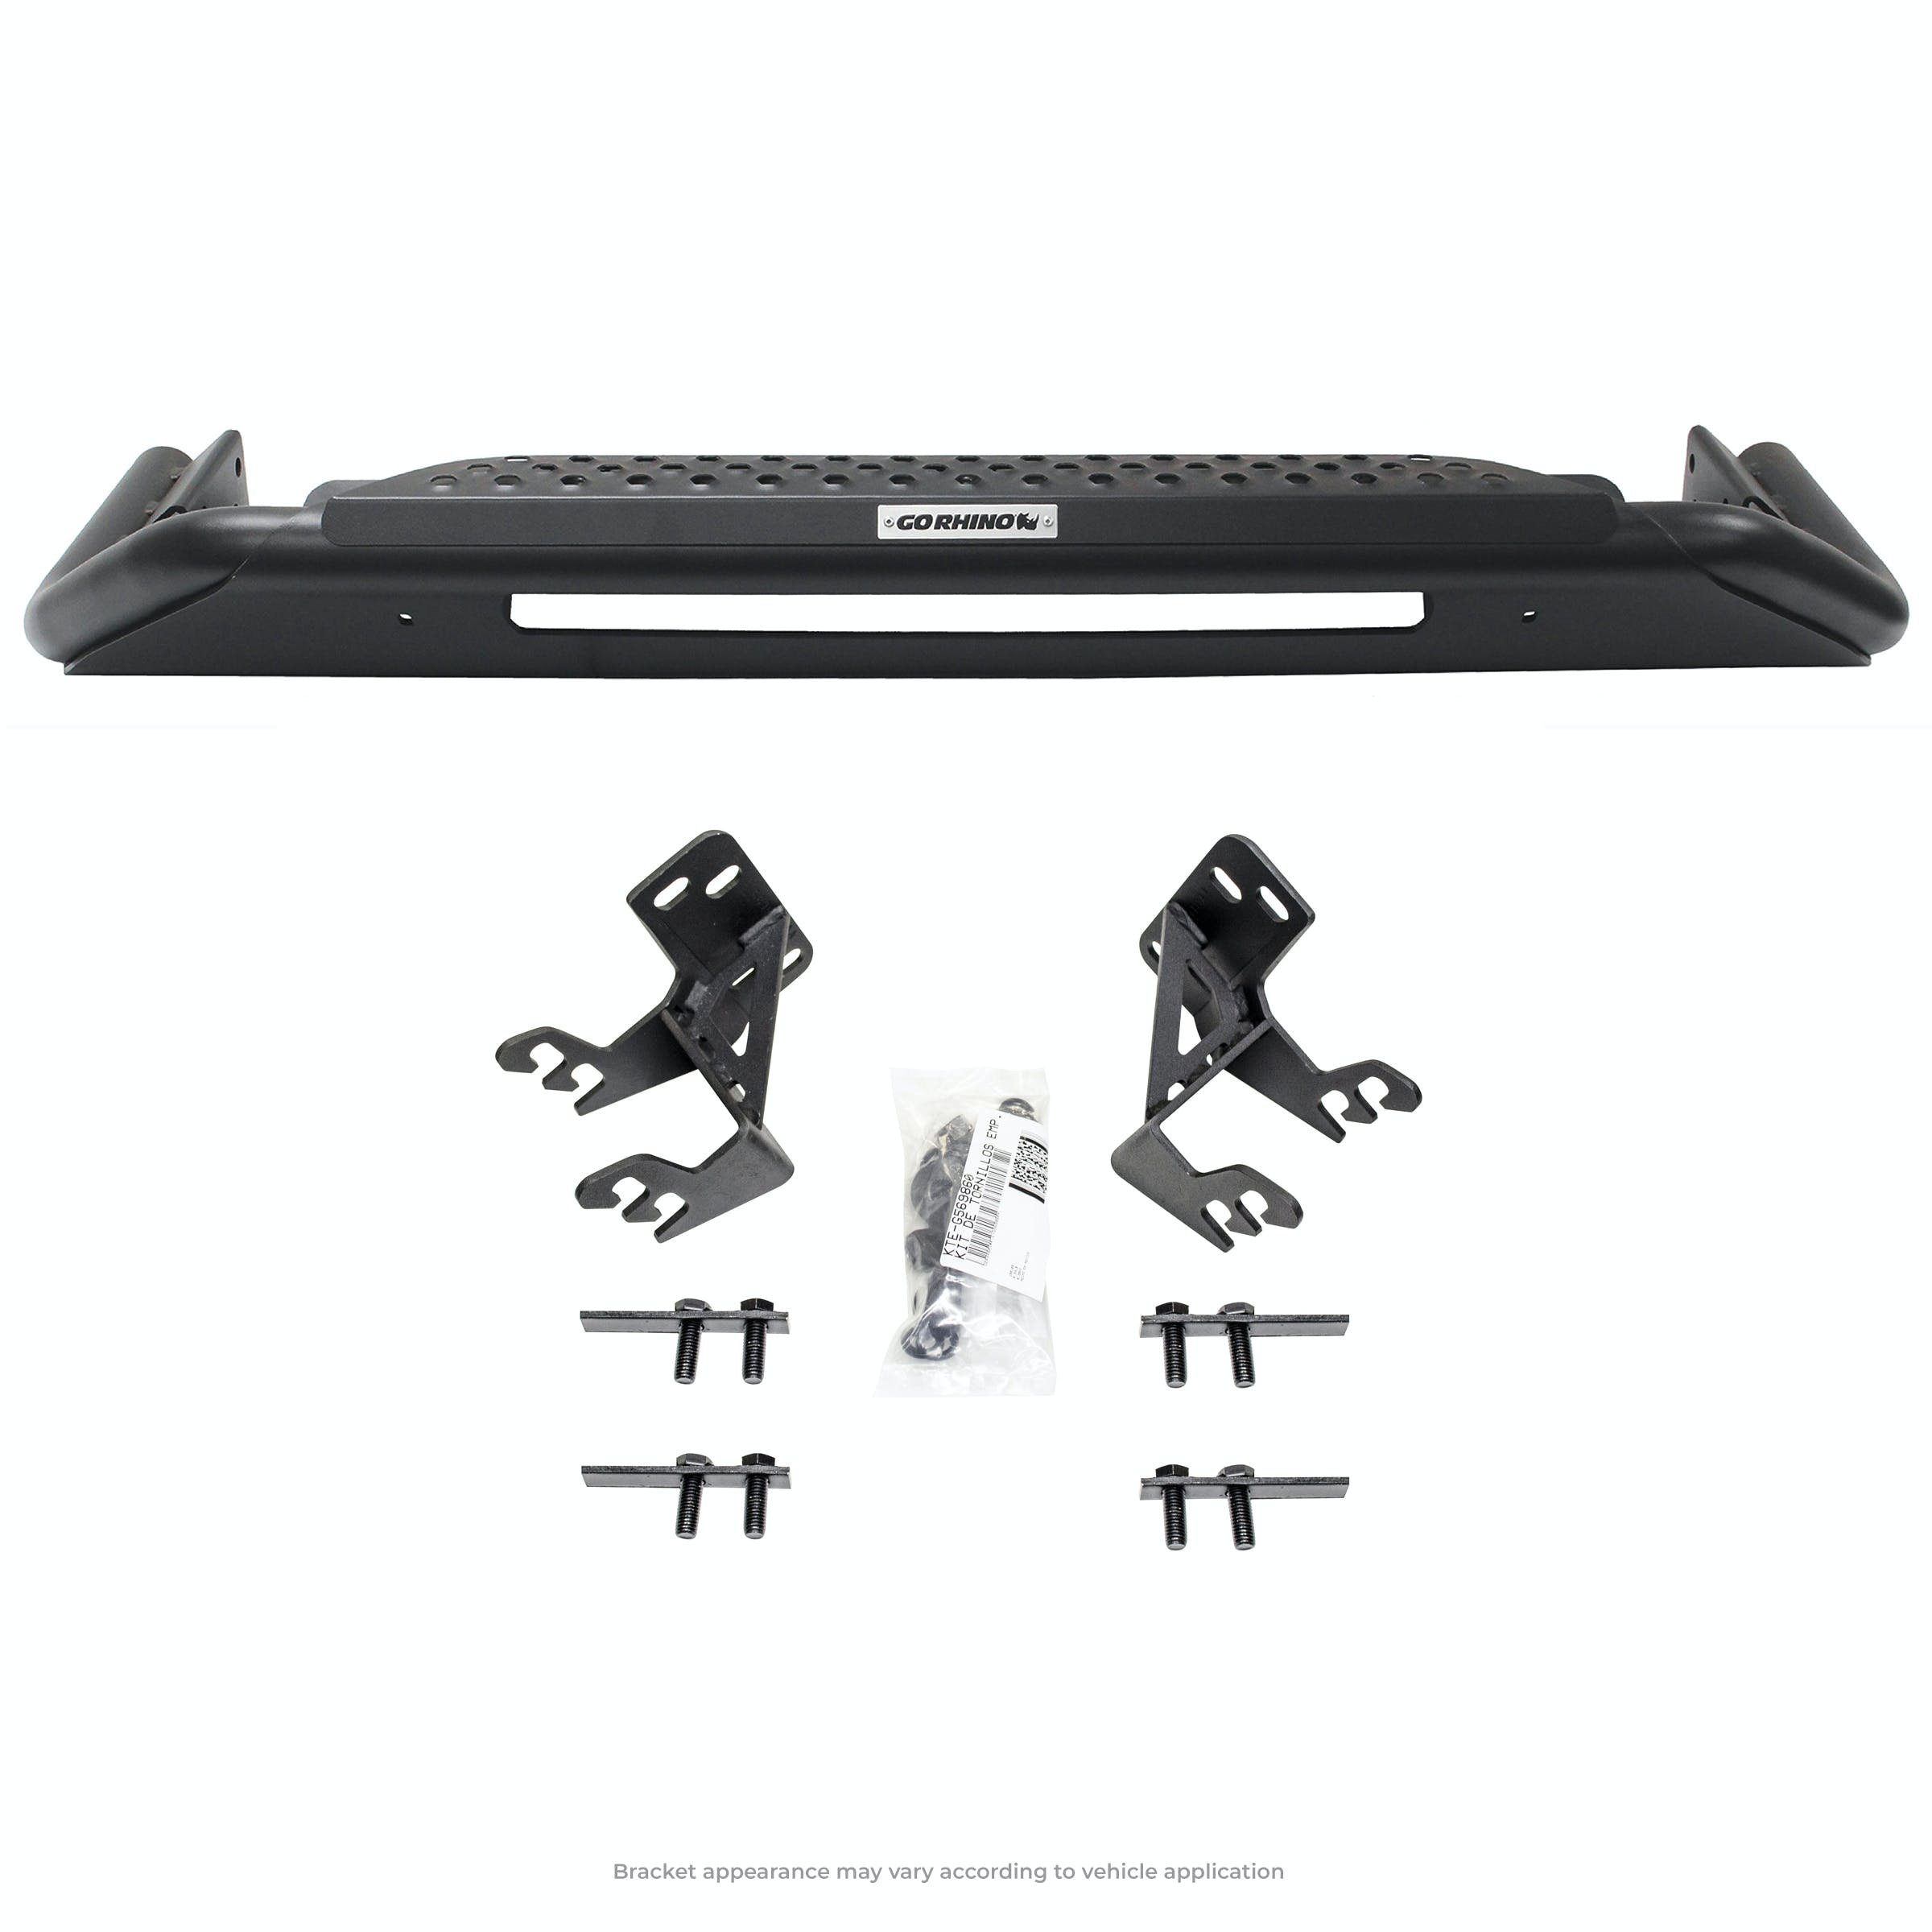 Go Rhino 565360T RC3 LR - Complete kit: Front guard + Brackets